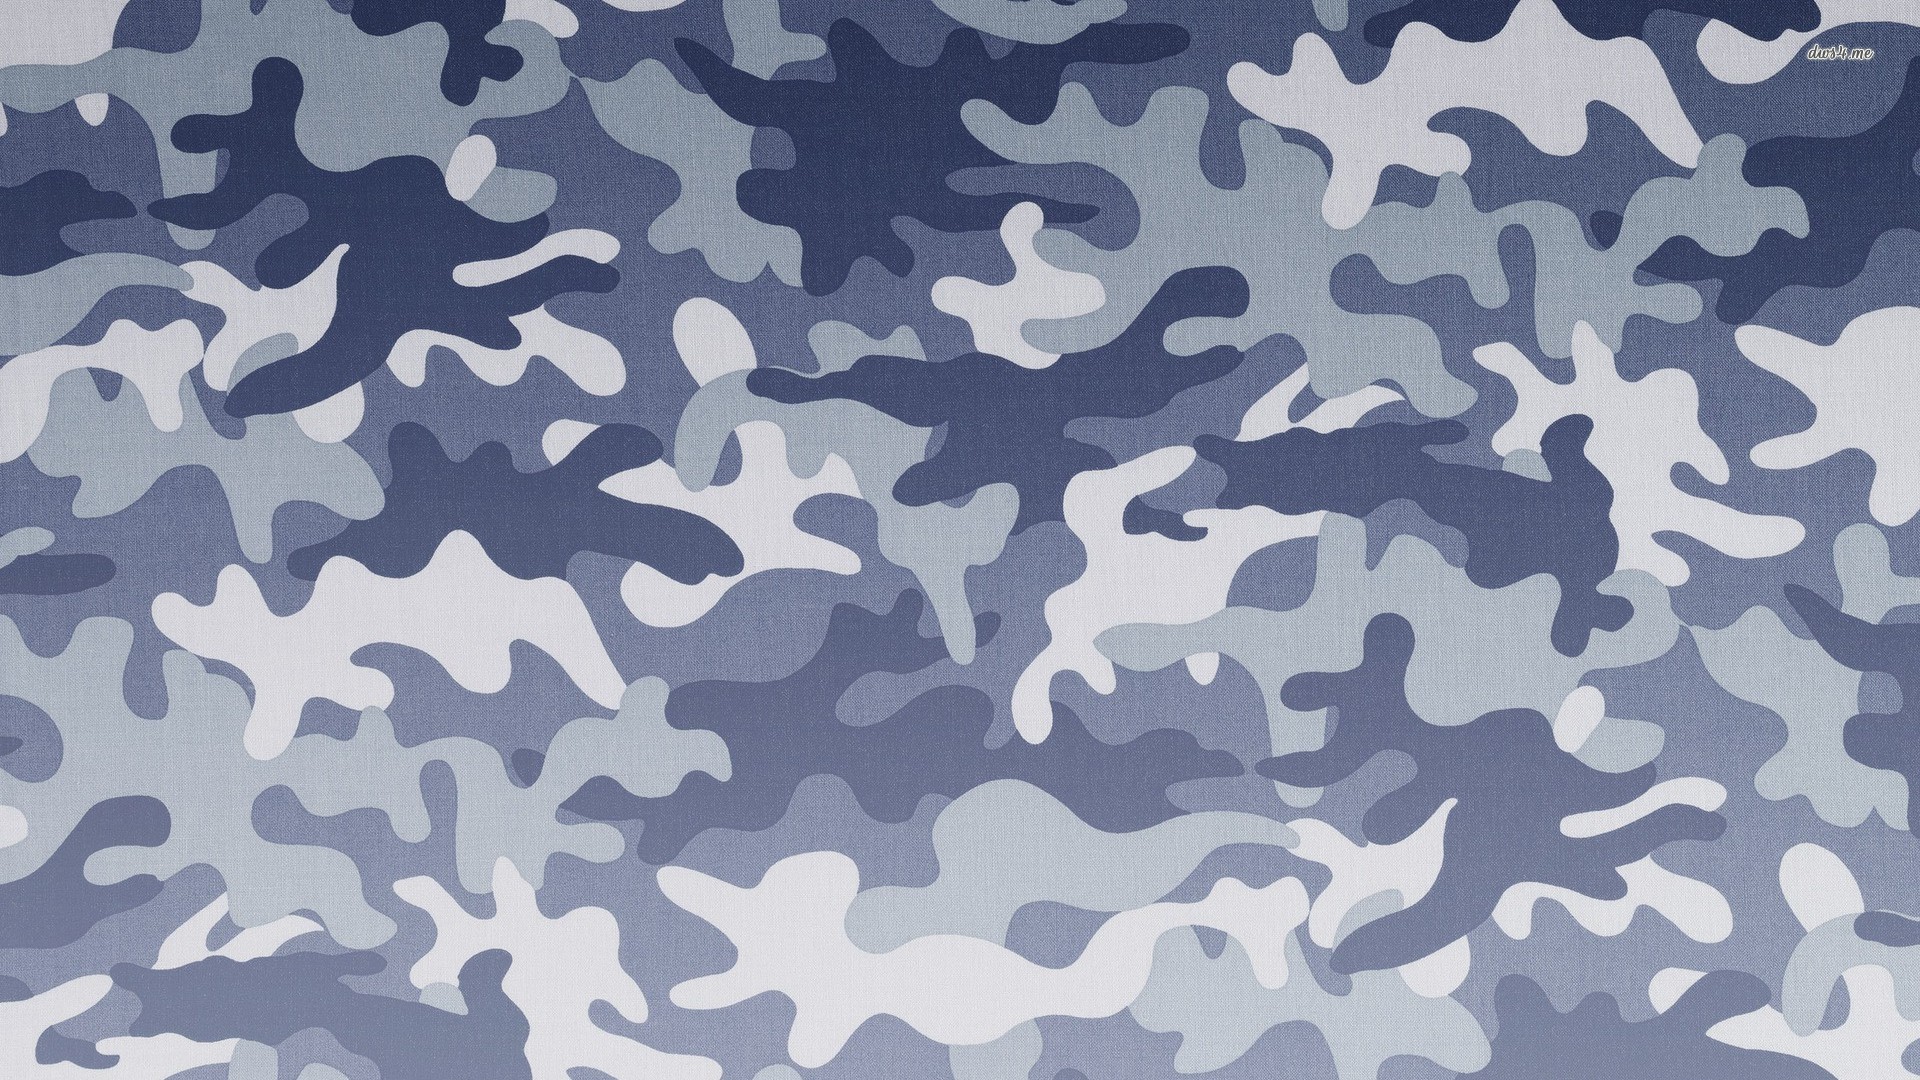 blue camouflage wallpaper,military camouflage,pattern,blue,camouflage,uniform